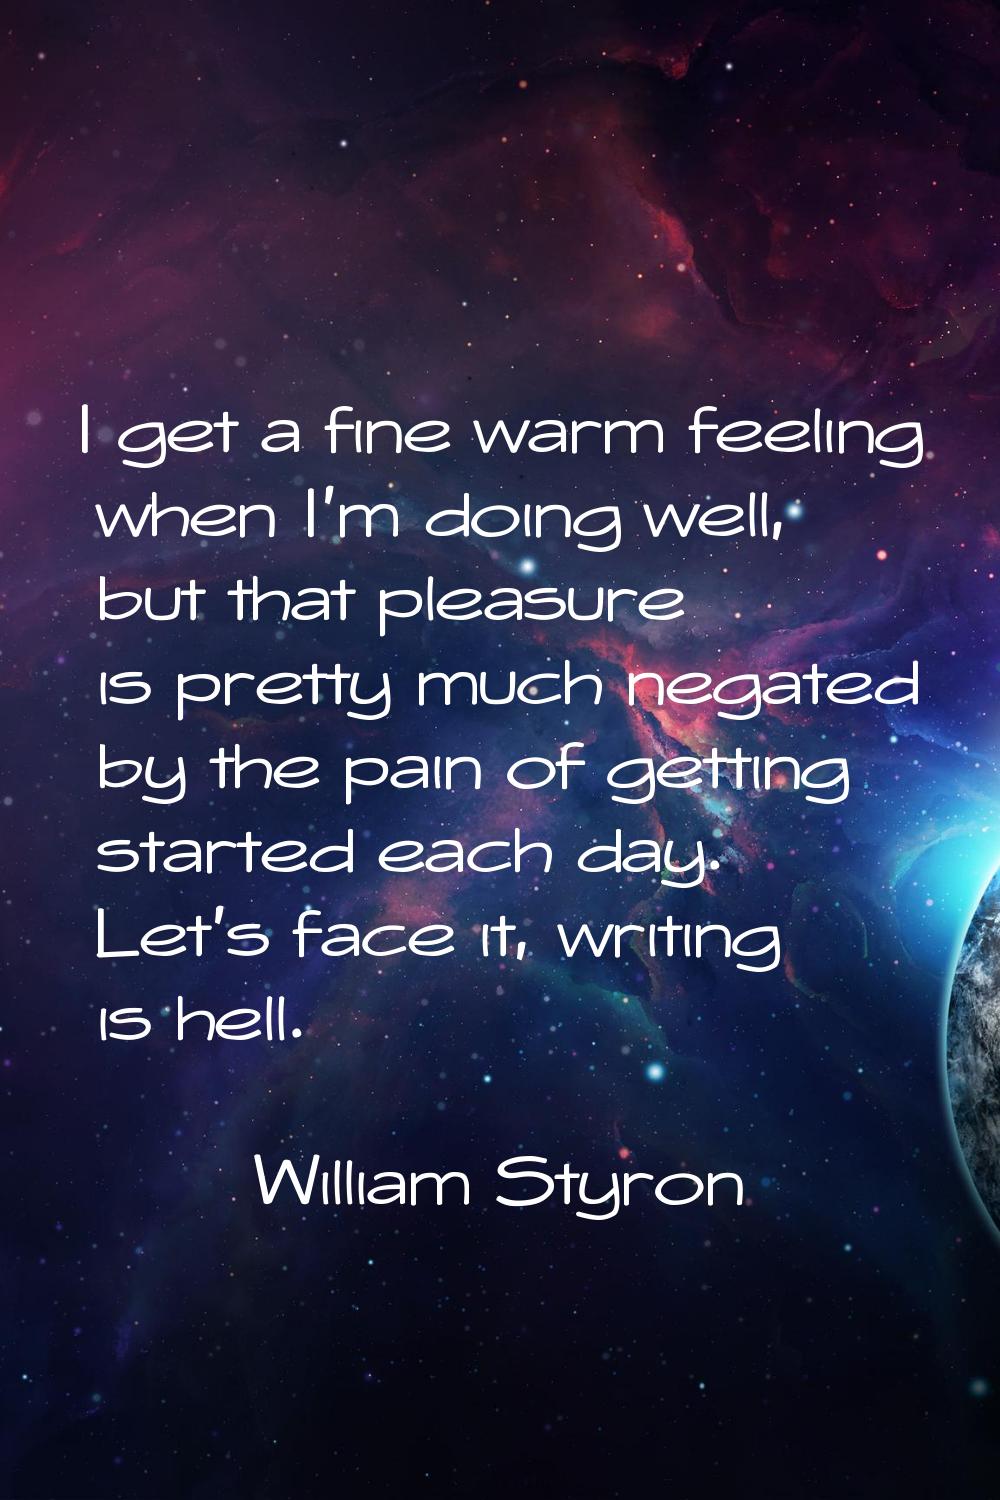 I get a fine warm feeling when I'm doing well, but that pleasure is pretty much negated by the pain